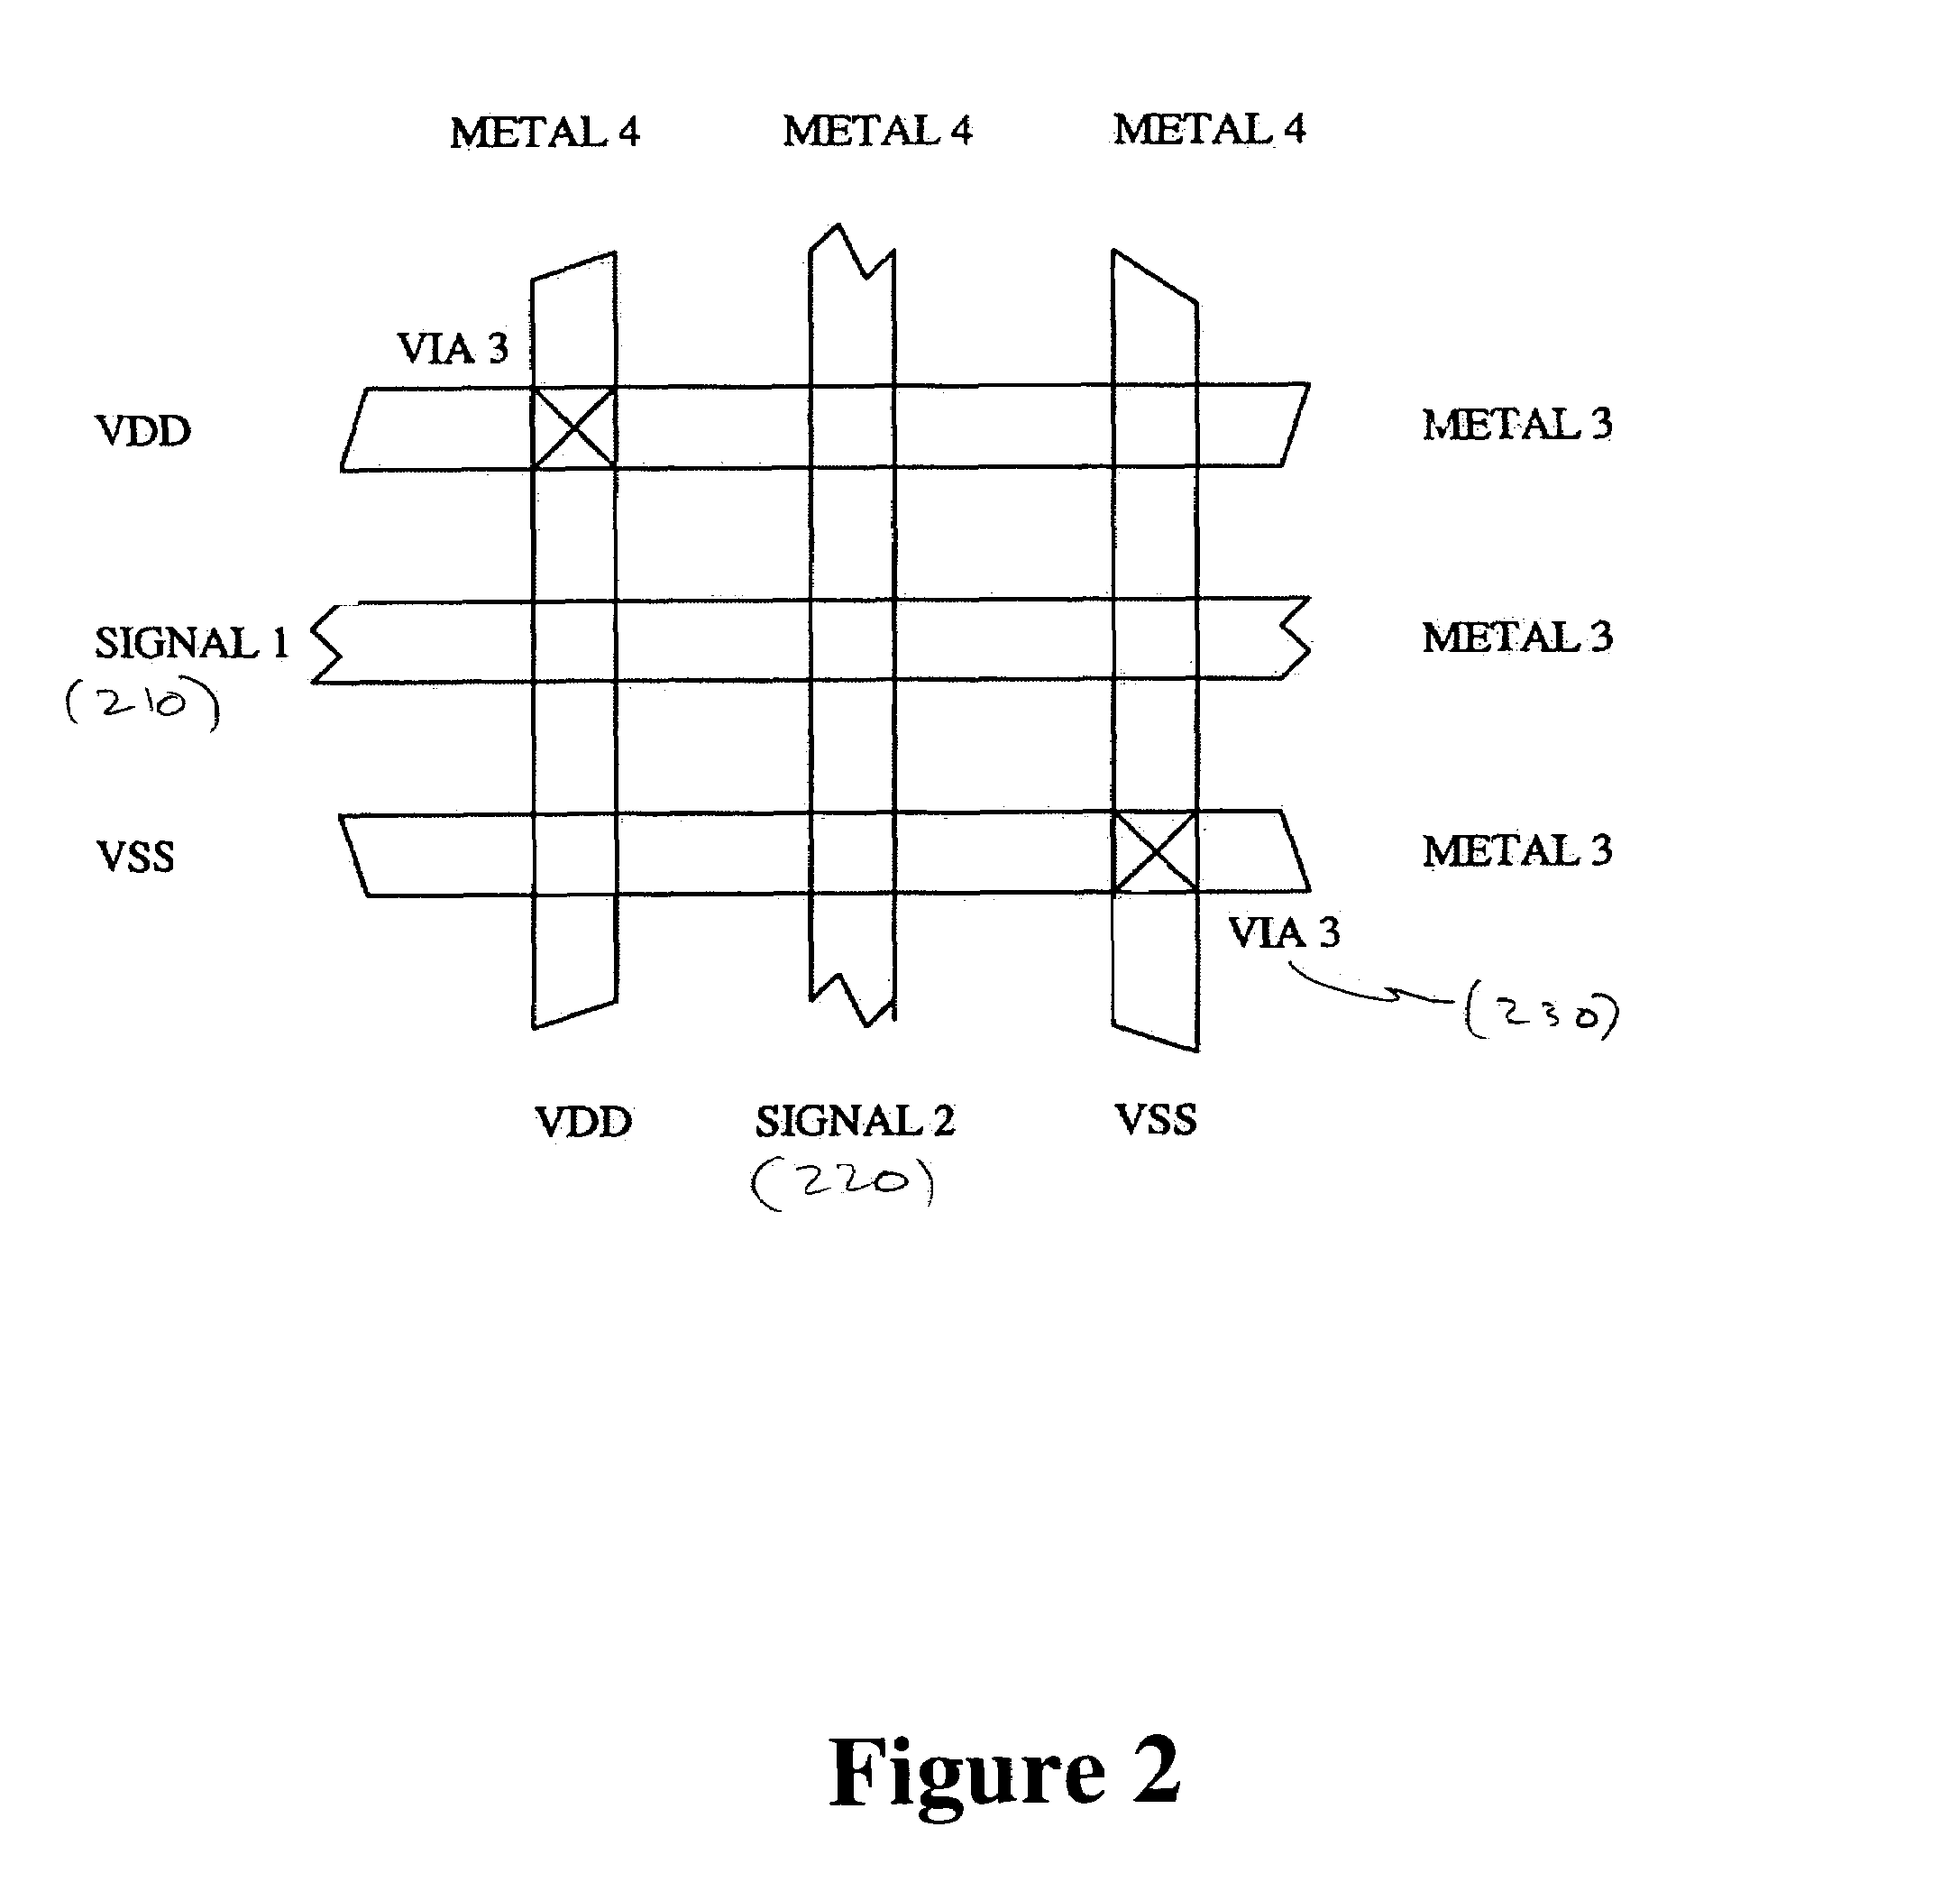 Power and ground shield mesh to remove both capacitive and inductive signal coupling effects of routing in integrated circuit device